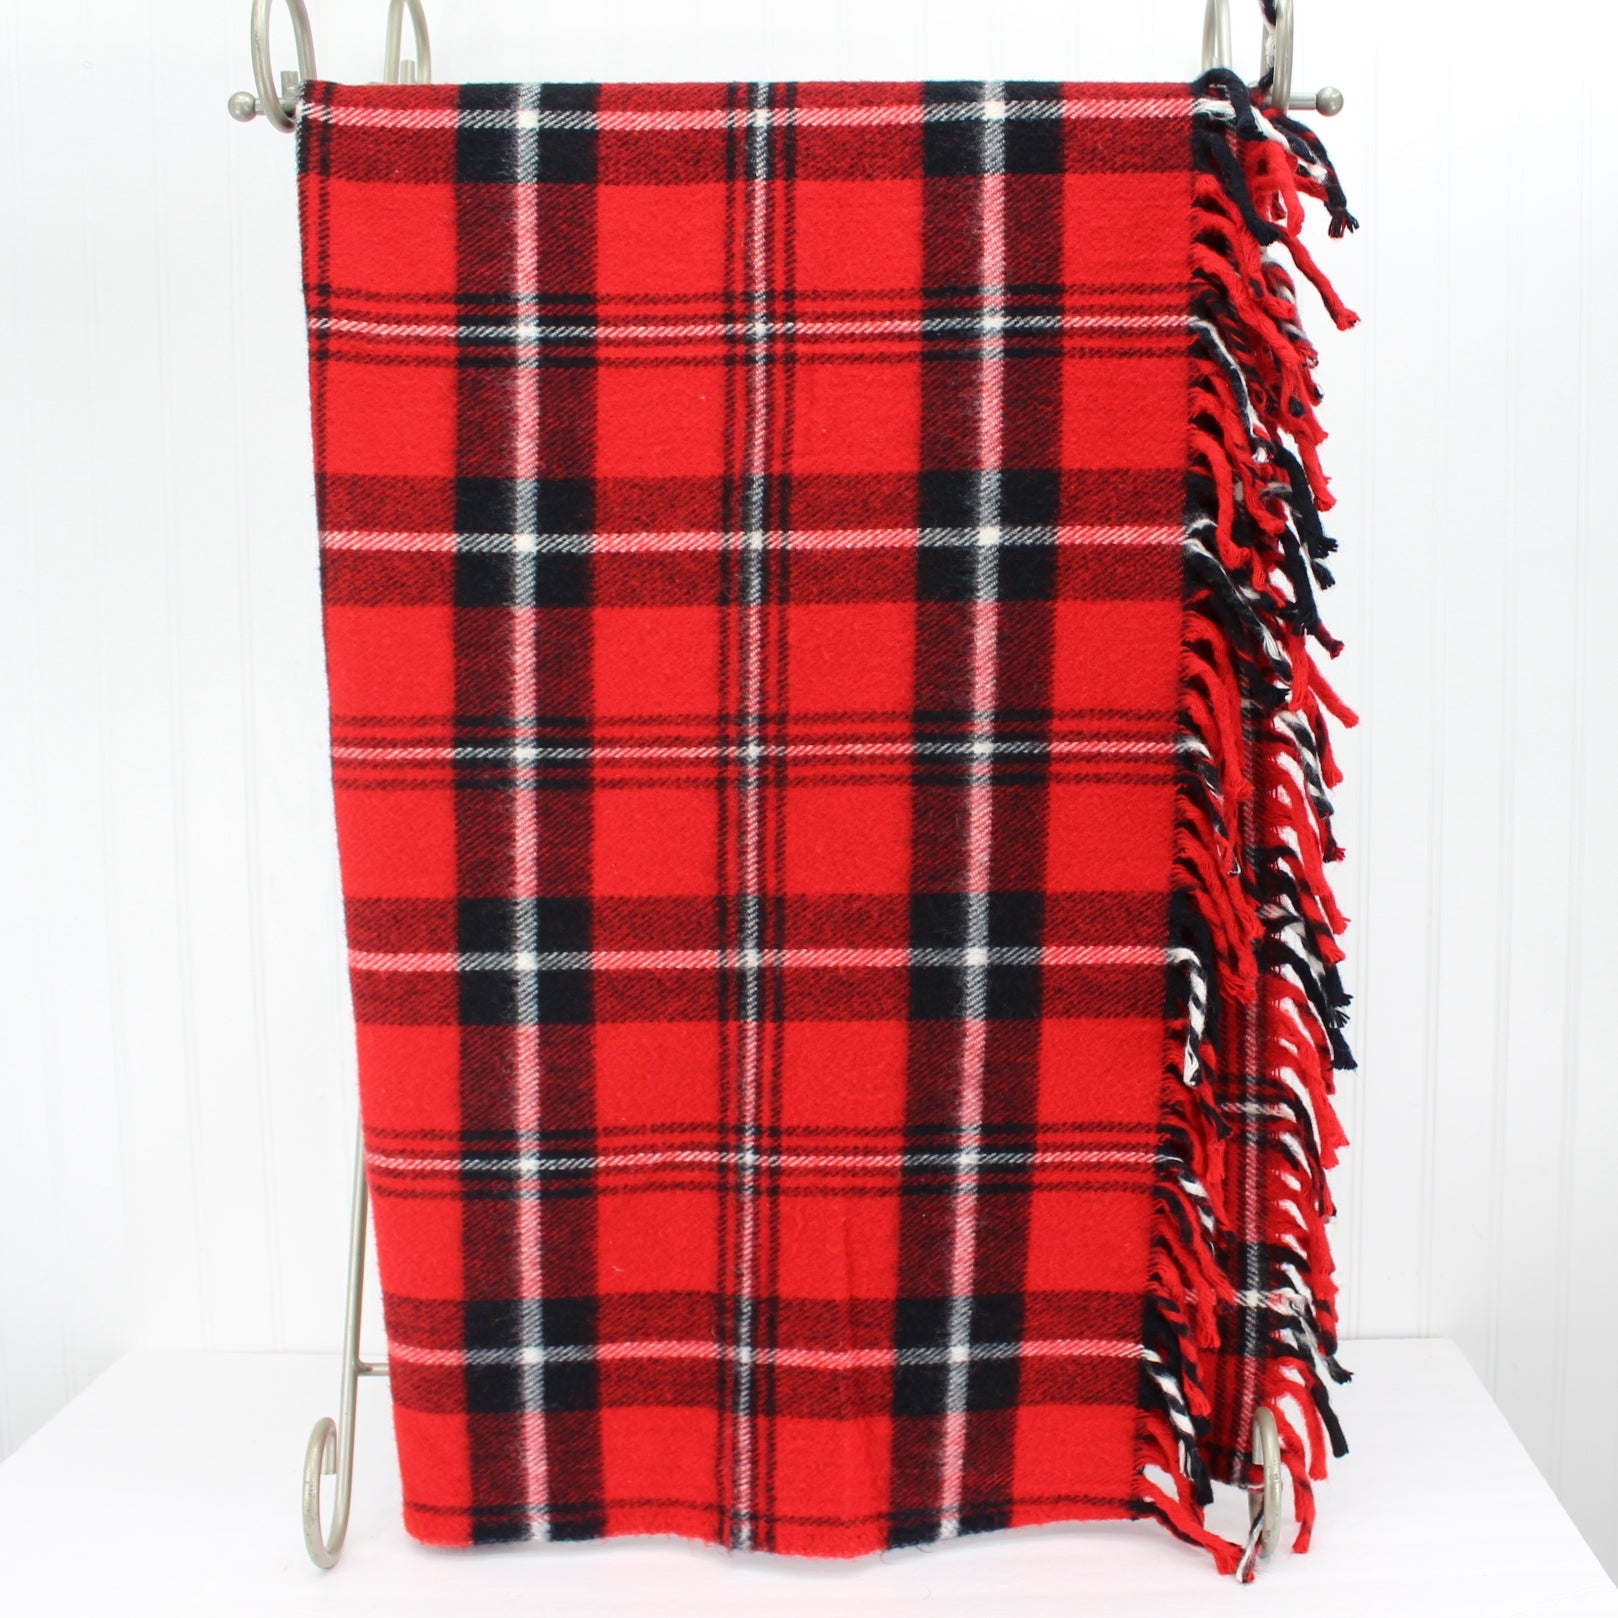 Faribo Classic Red Plaid Acrylic Fringed Throw width view of blanket doubled